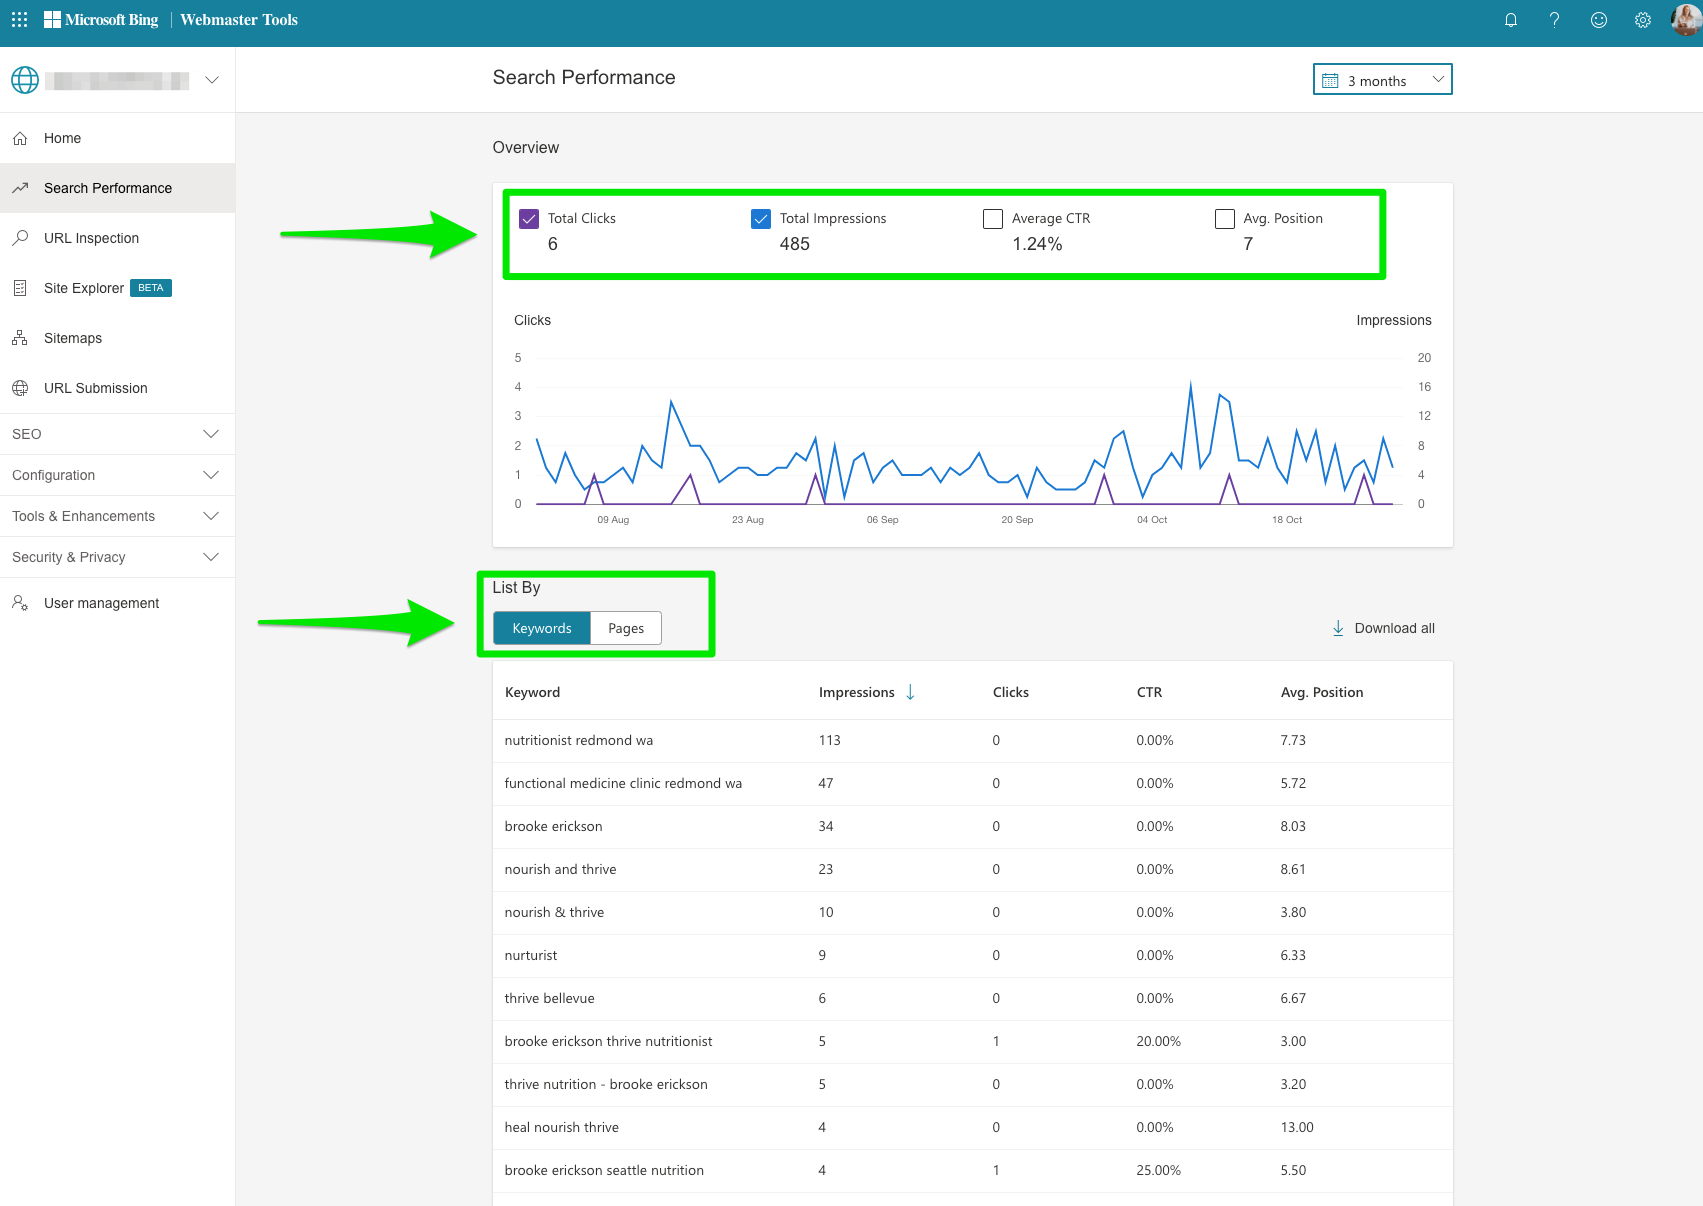 bing webmaster tools search performance